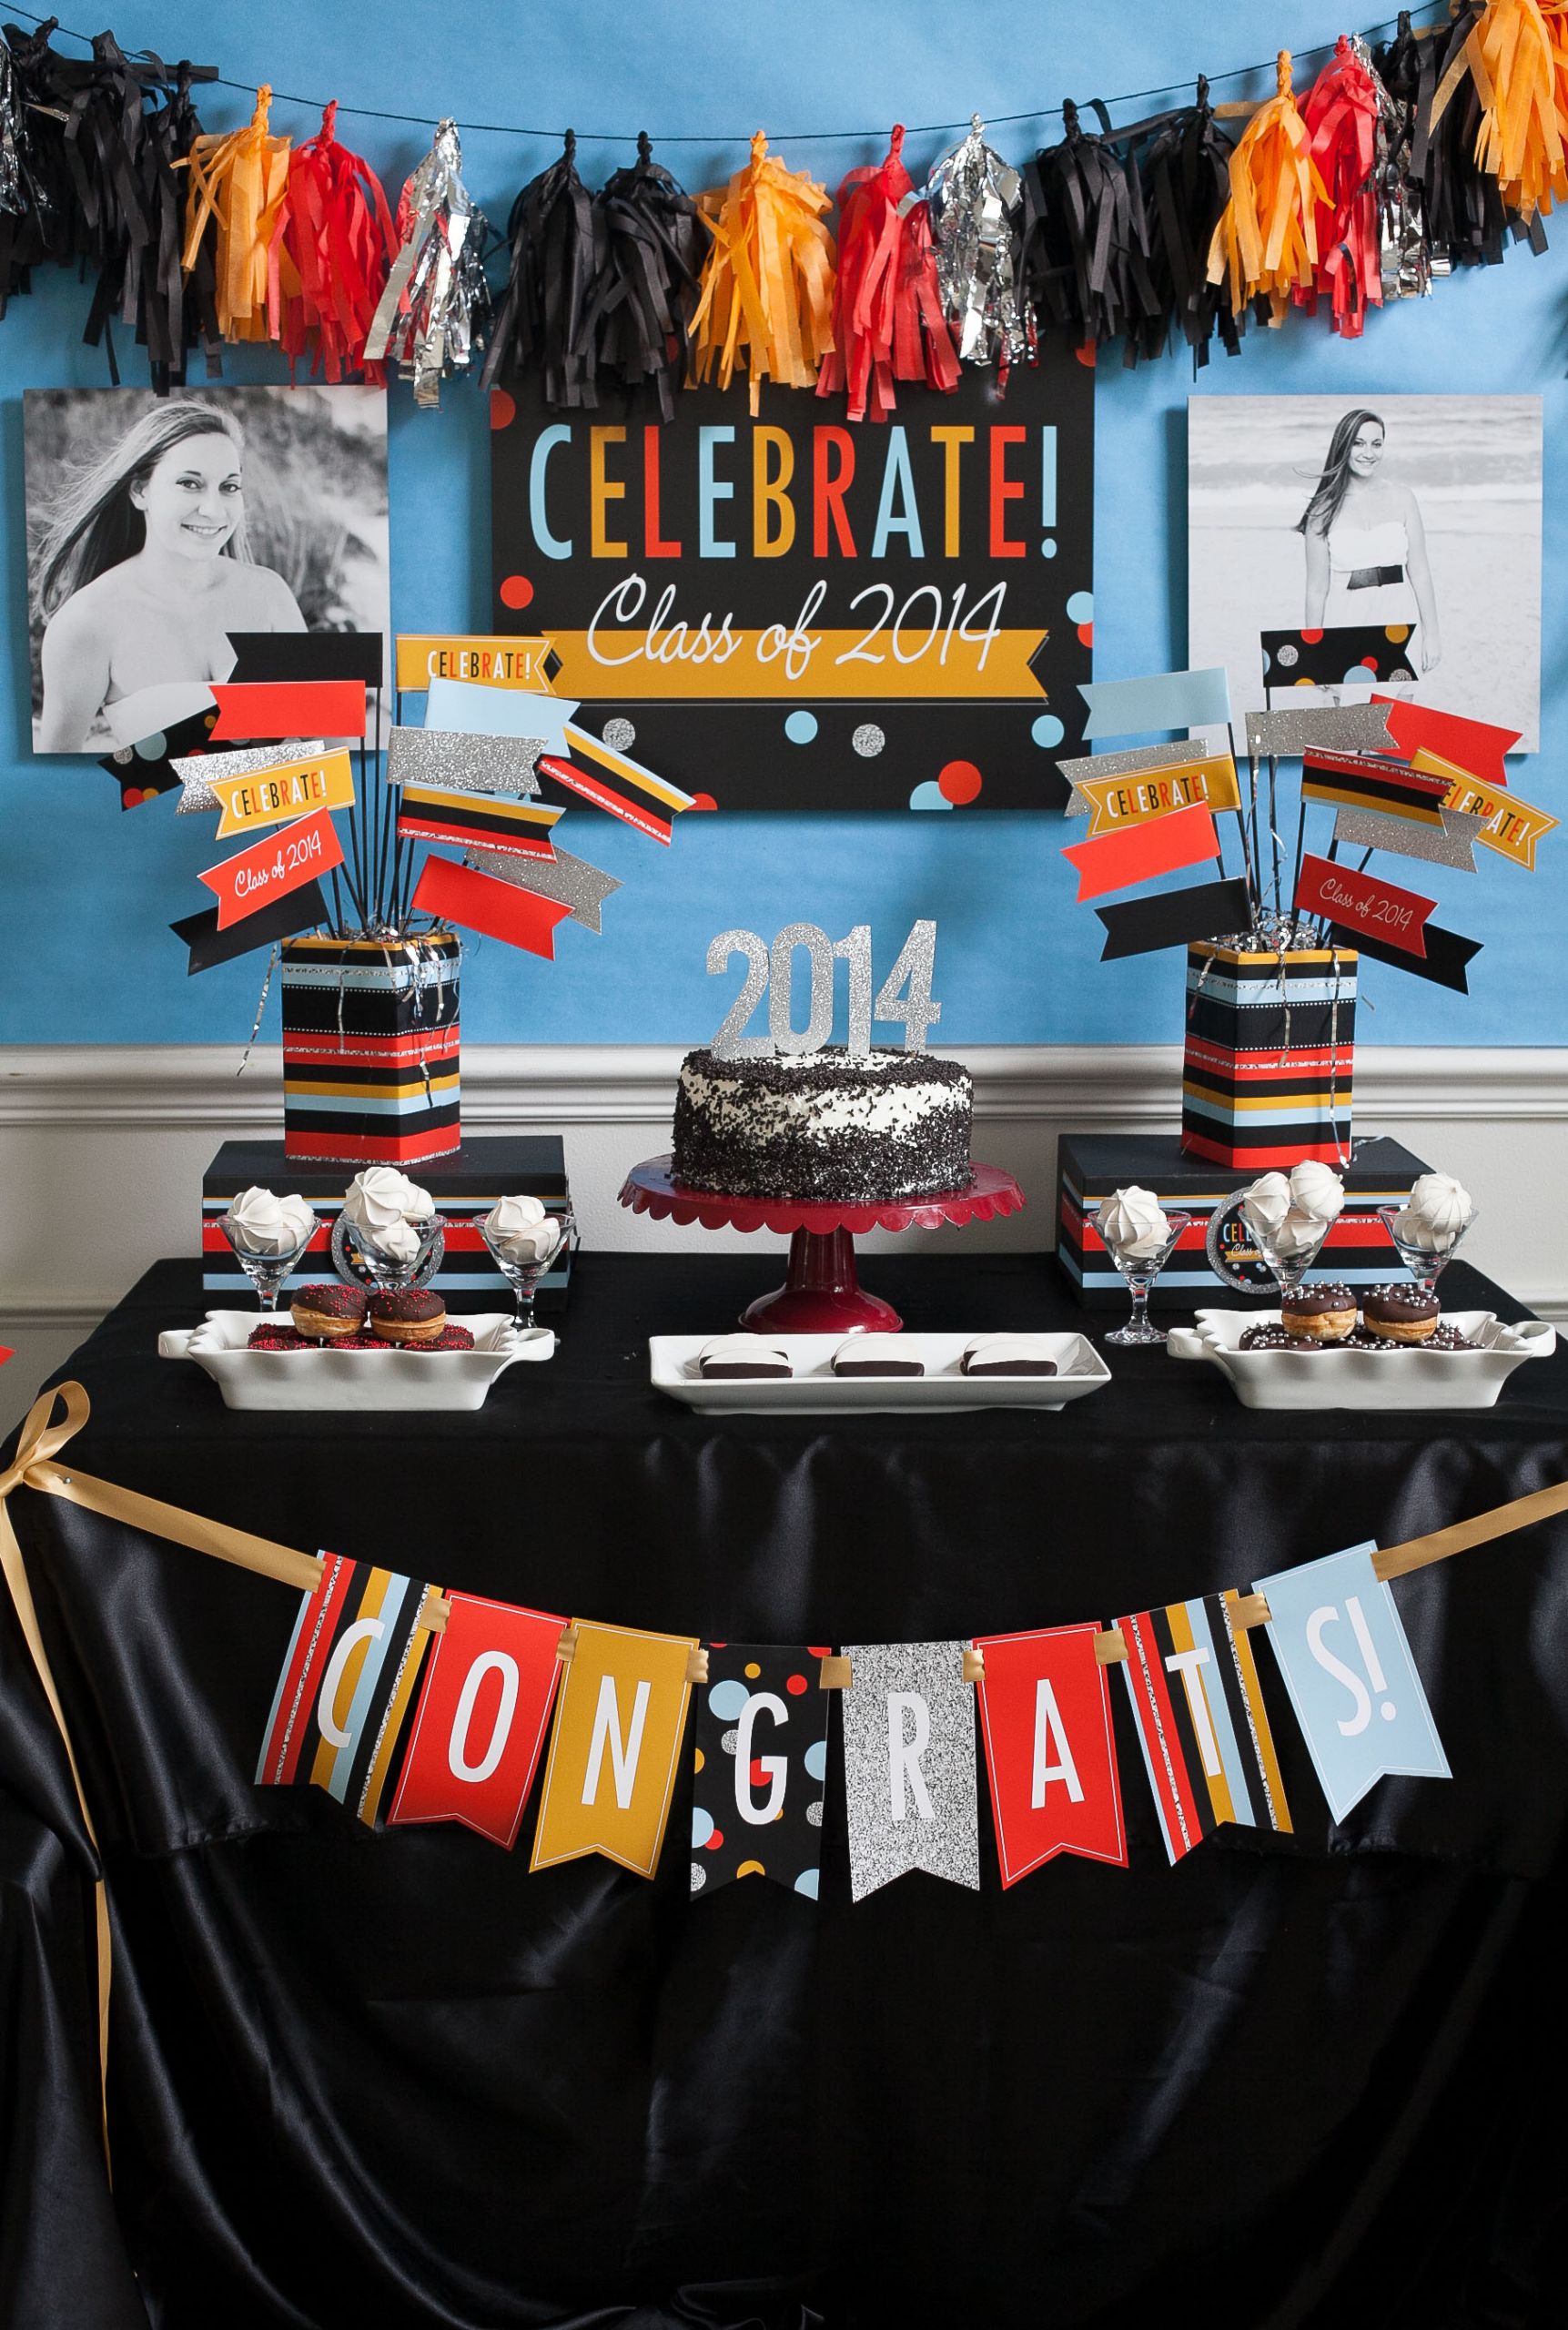 Masters Graduation Party Ideas
 Graduation Party Ideas Inspiration and Free Printables